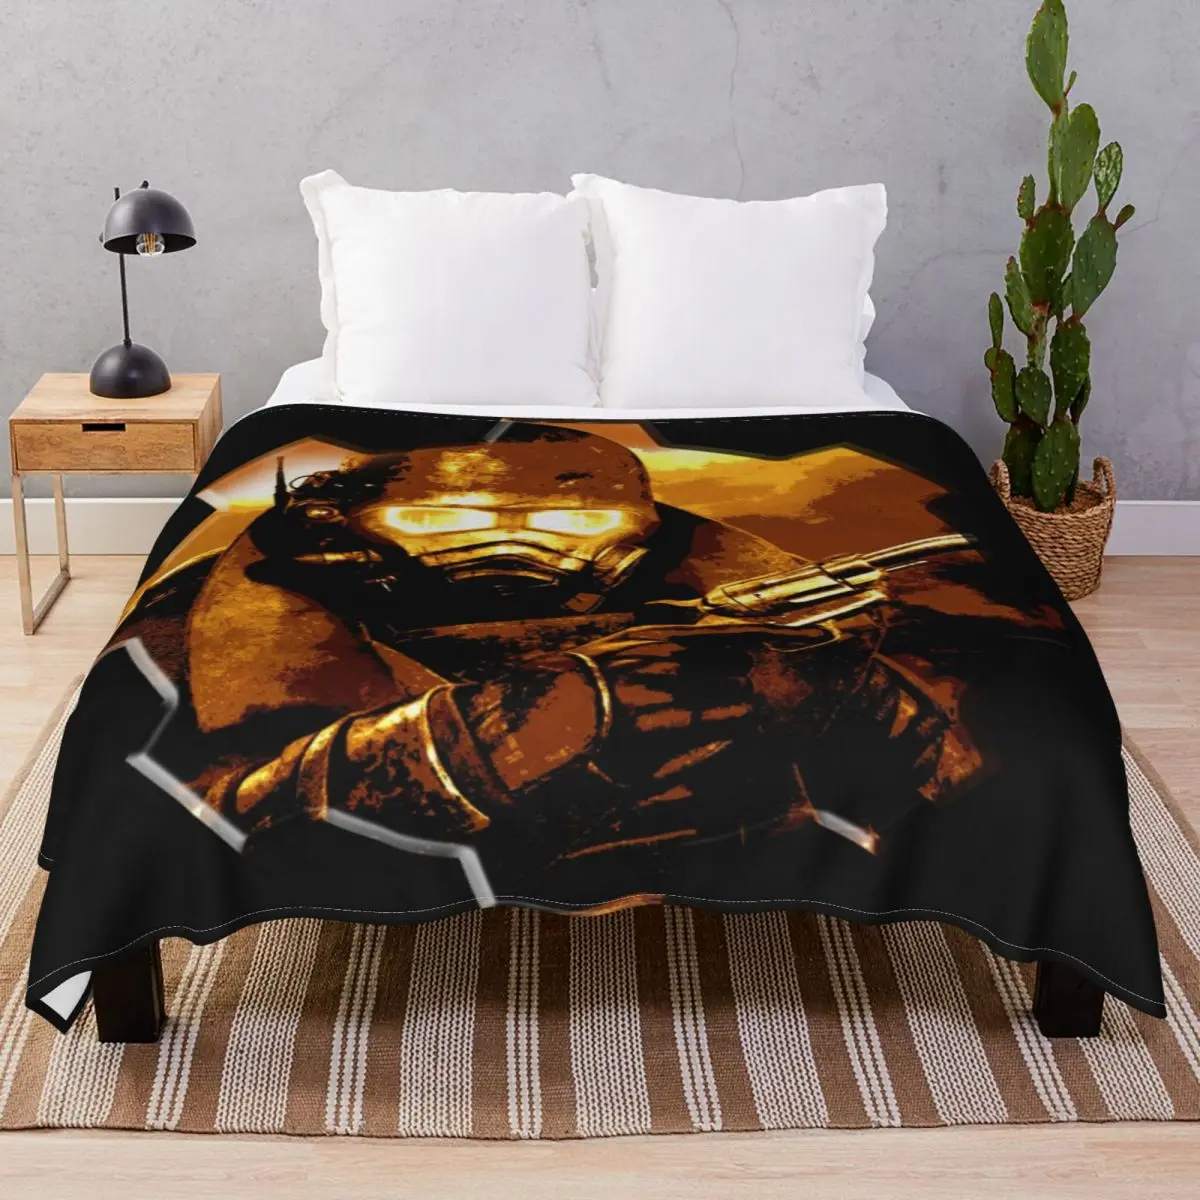 New Vegas Blankets Fleece Plush Decoration Breathable Throw Blanket for Bed Home Couch Camp Cinema